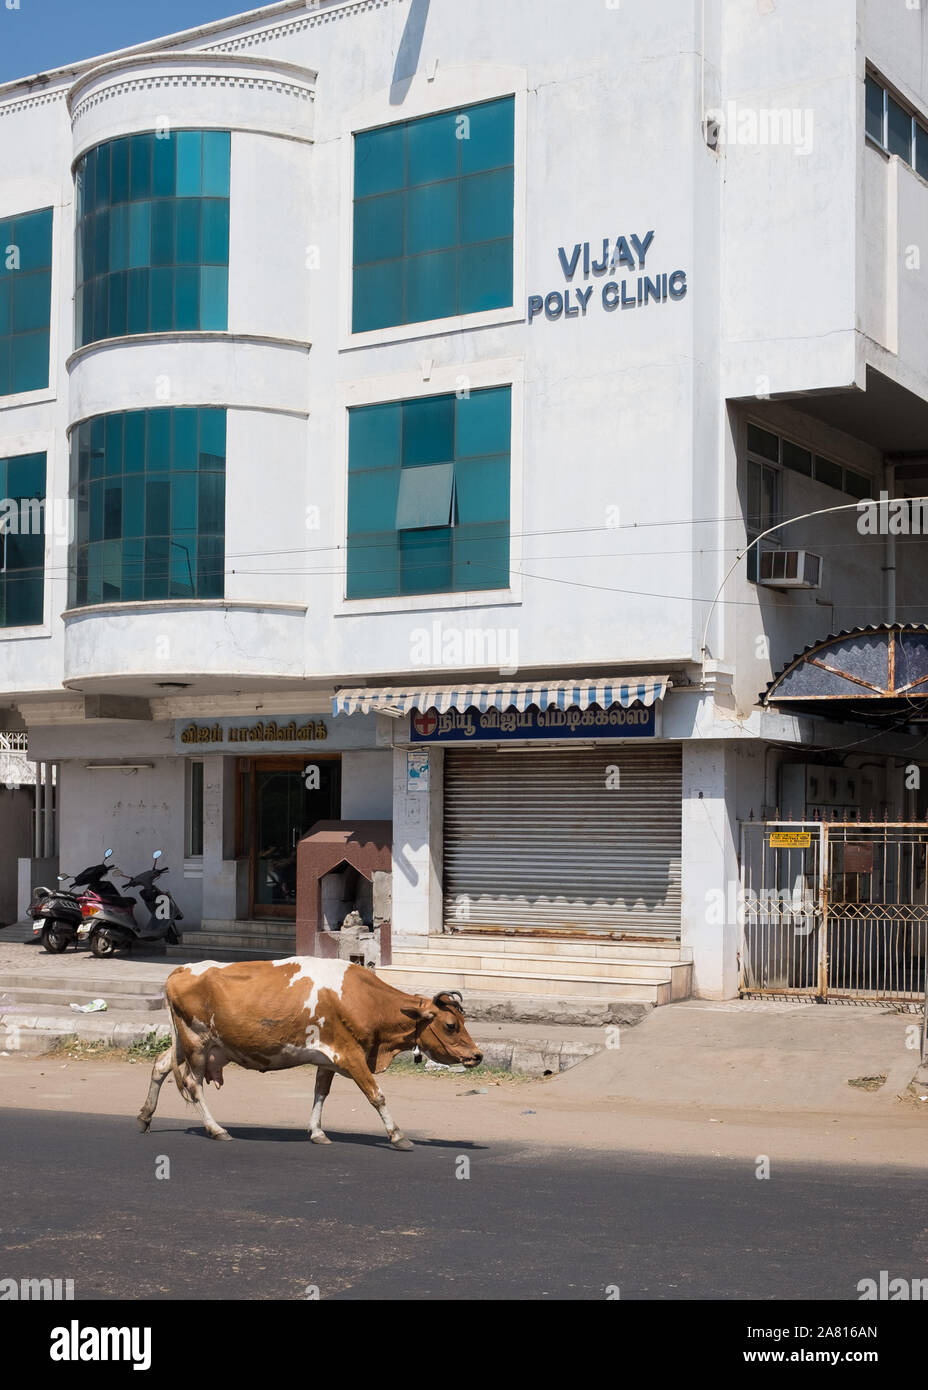 Cow walking past poly clinic building in Trichy, Tamil Nadu, India. Stock Photo